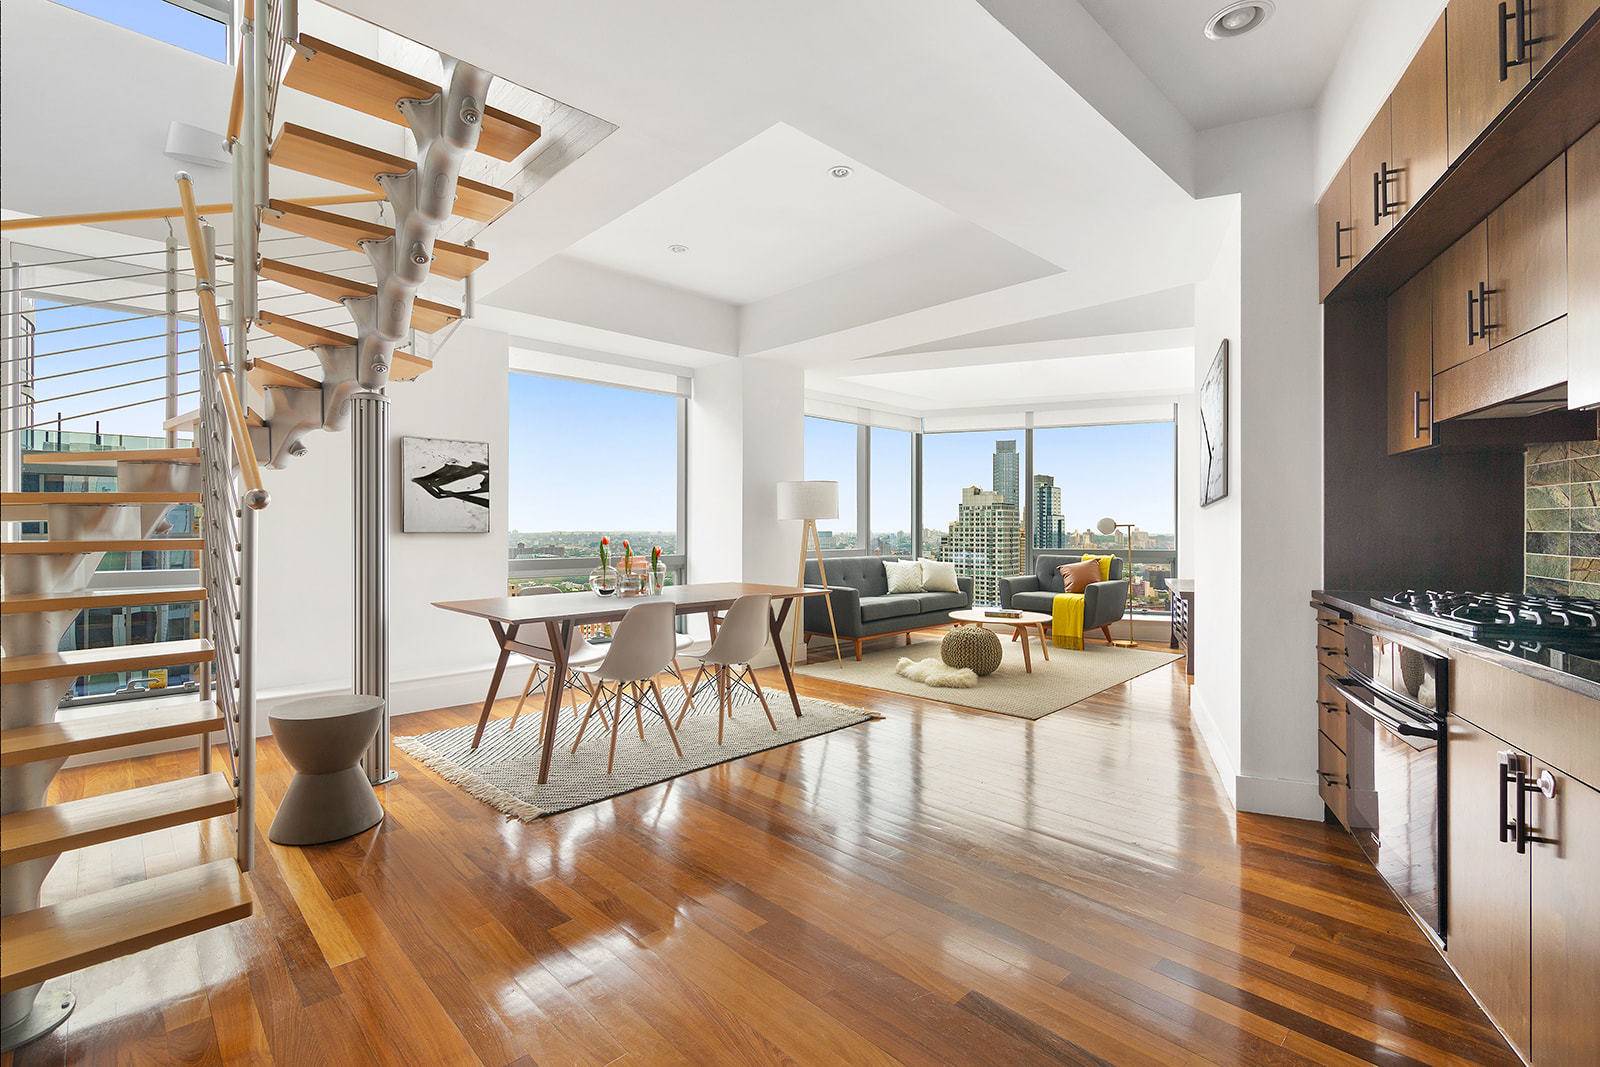 The quintessential penthouse apartment, complete with a duplex layout, sprawling entertaining floor, and three truly separate bedrooms and bathrooms.